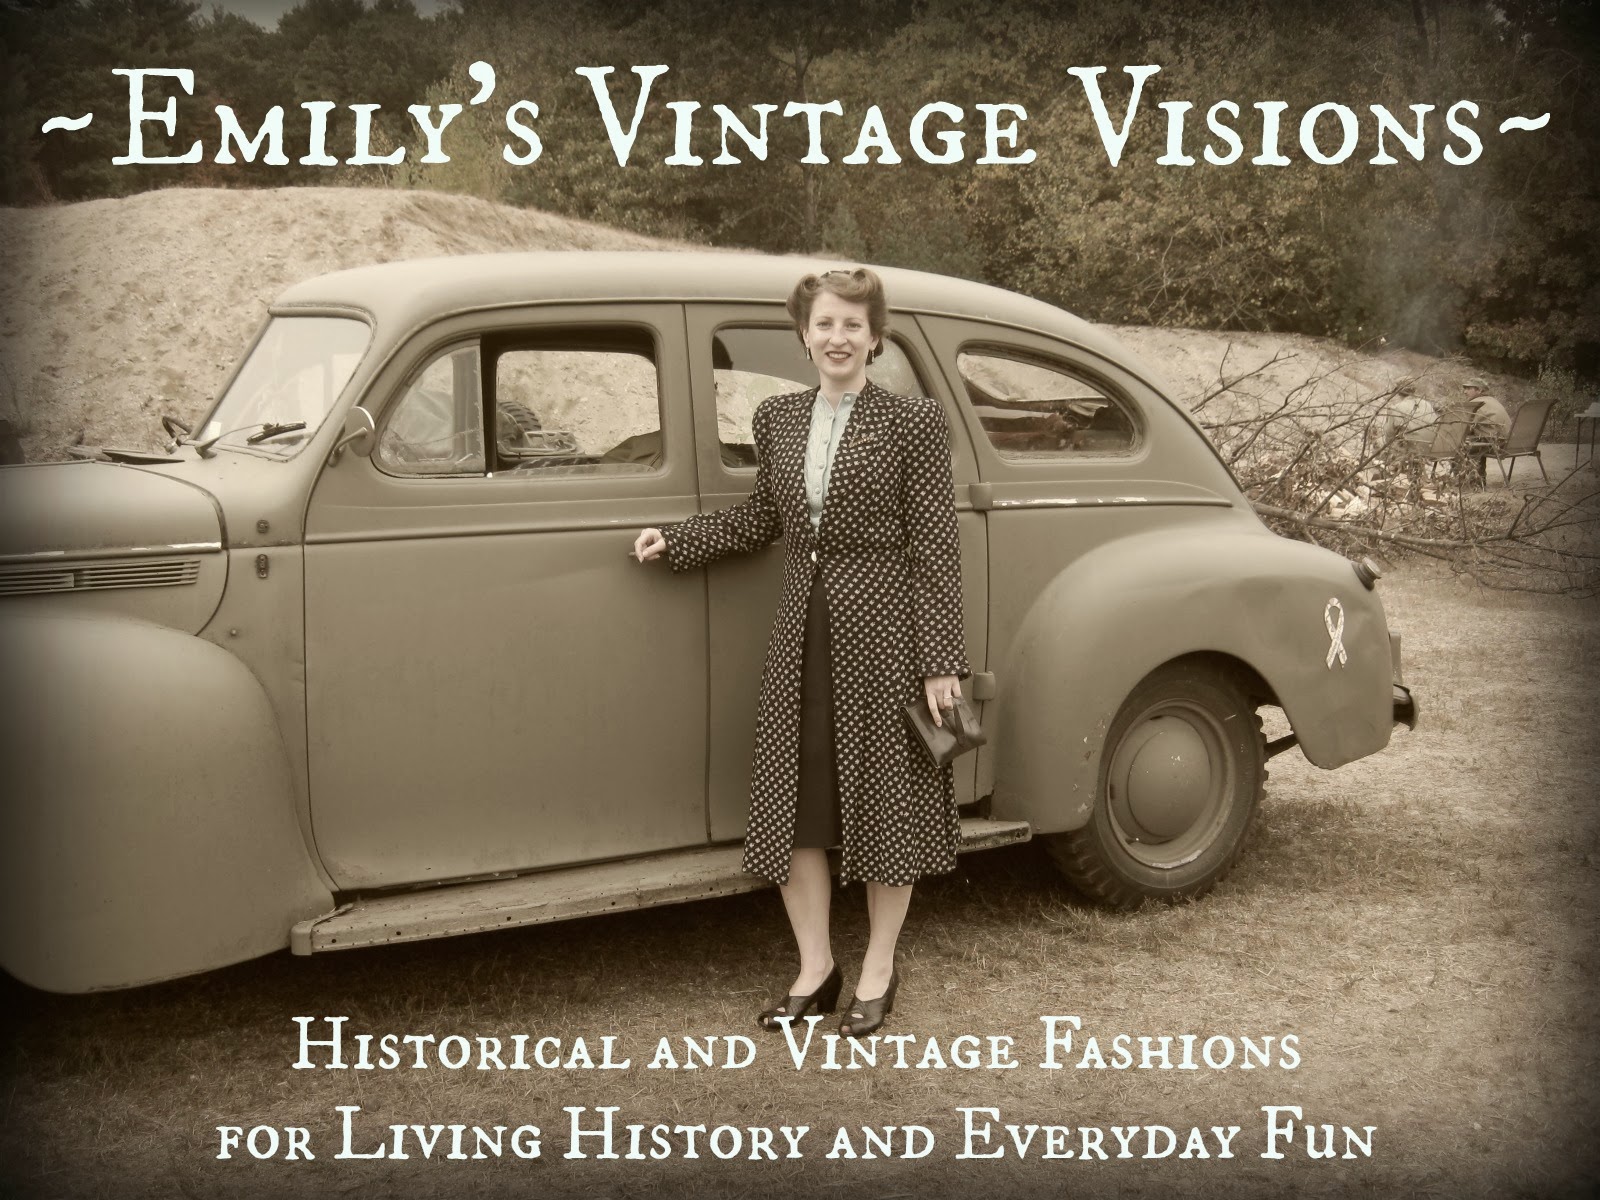 Emily's Vintage Visions